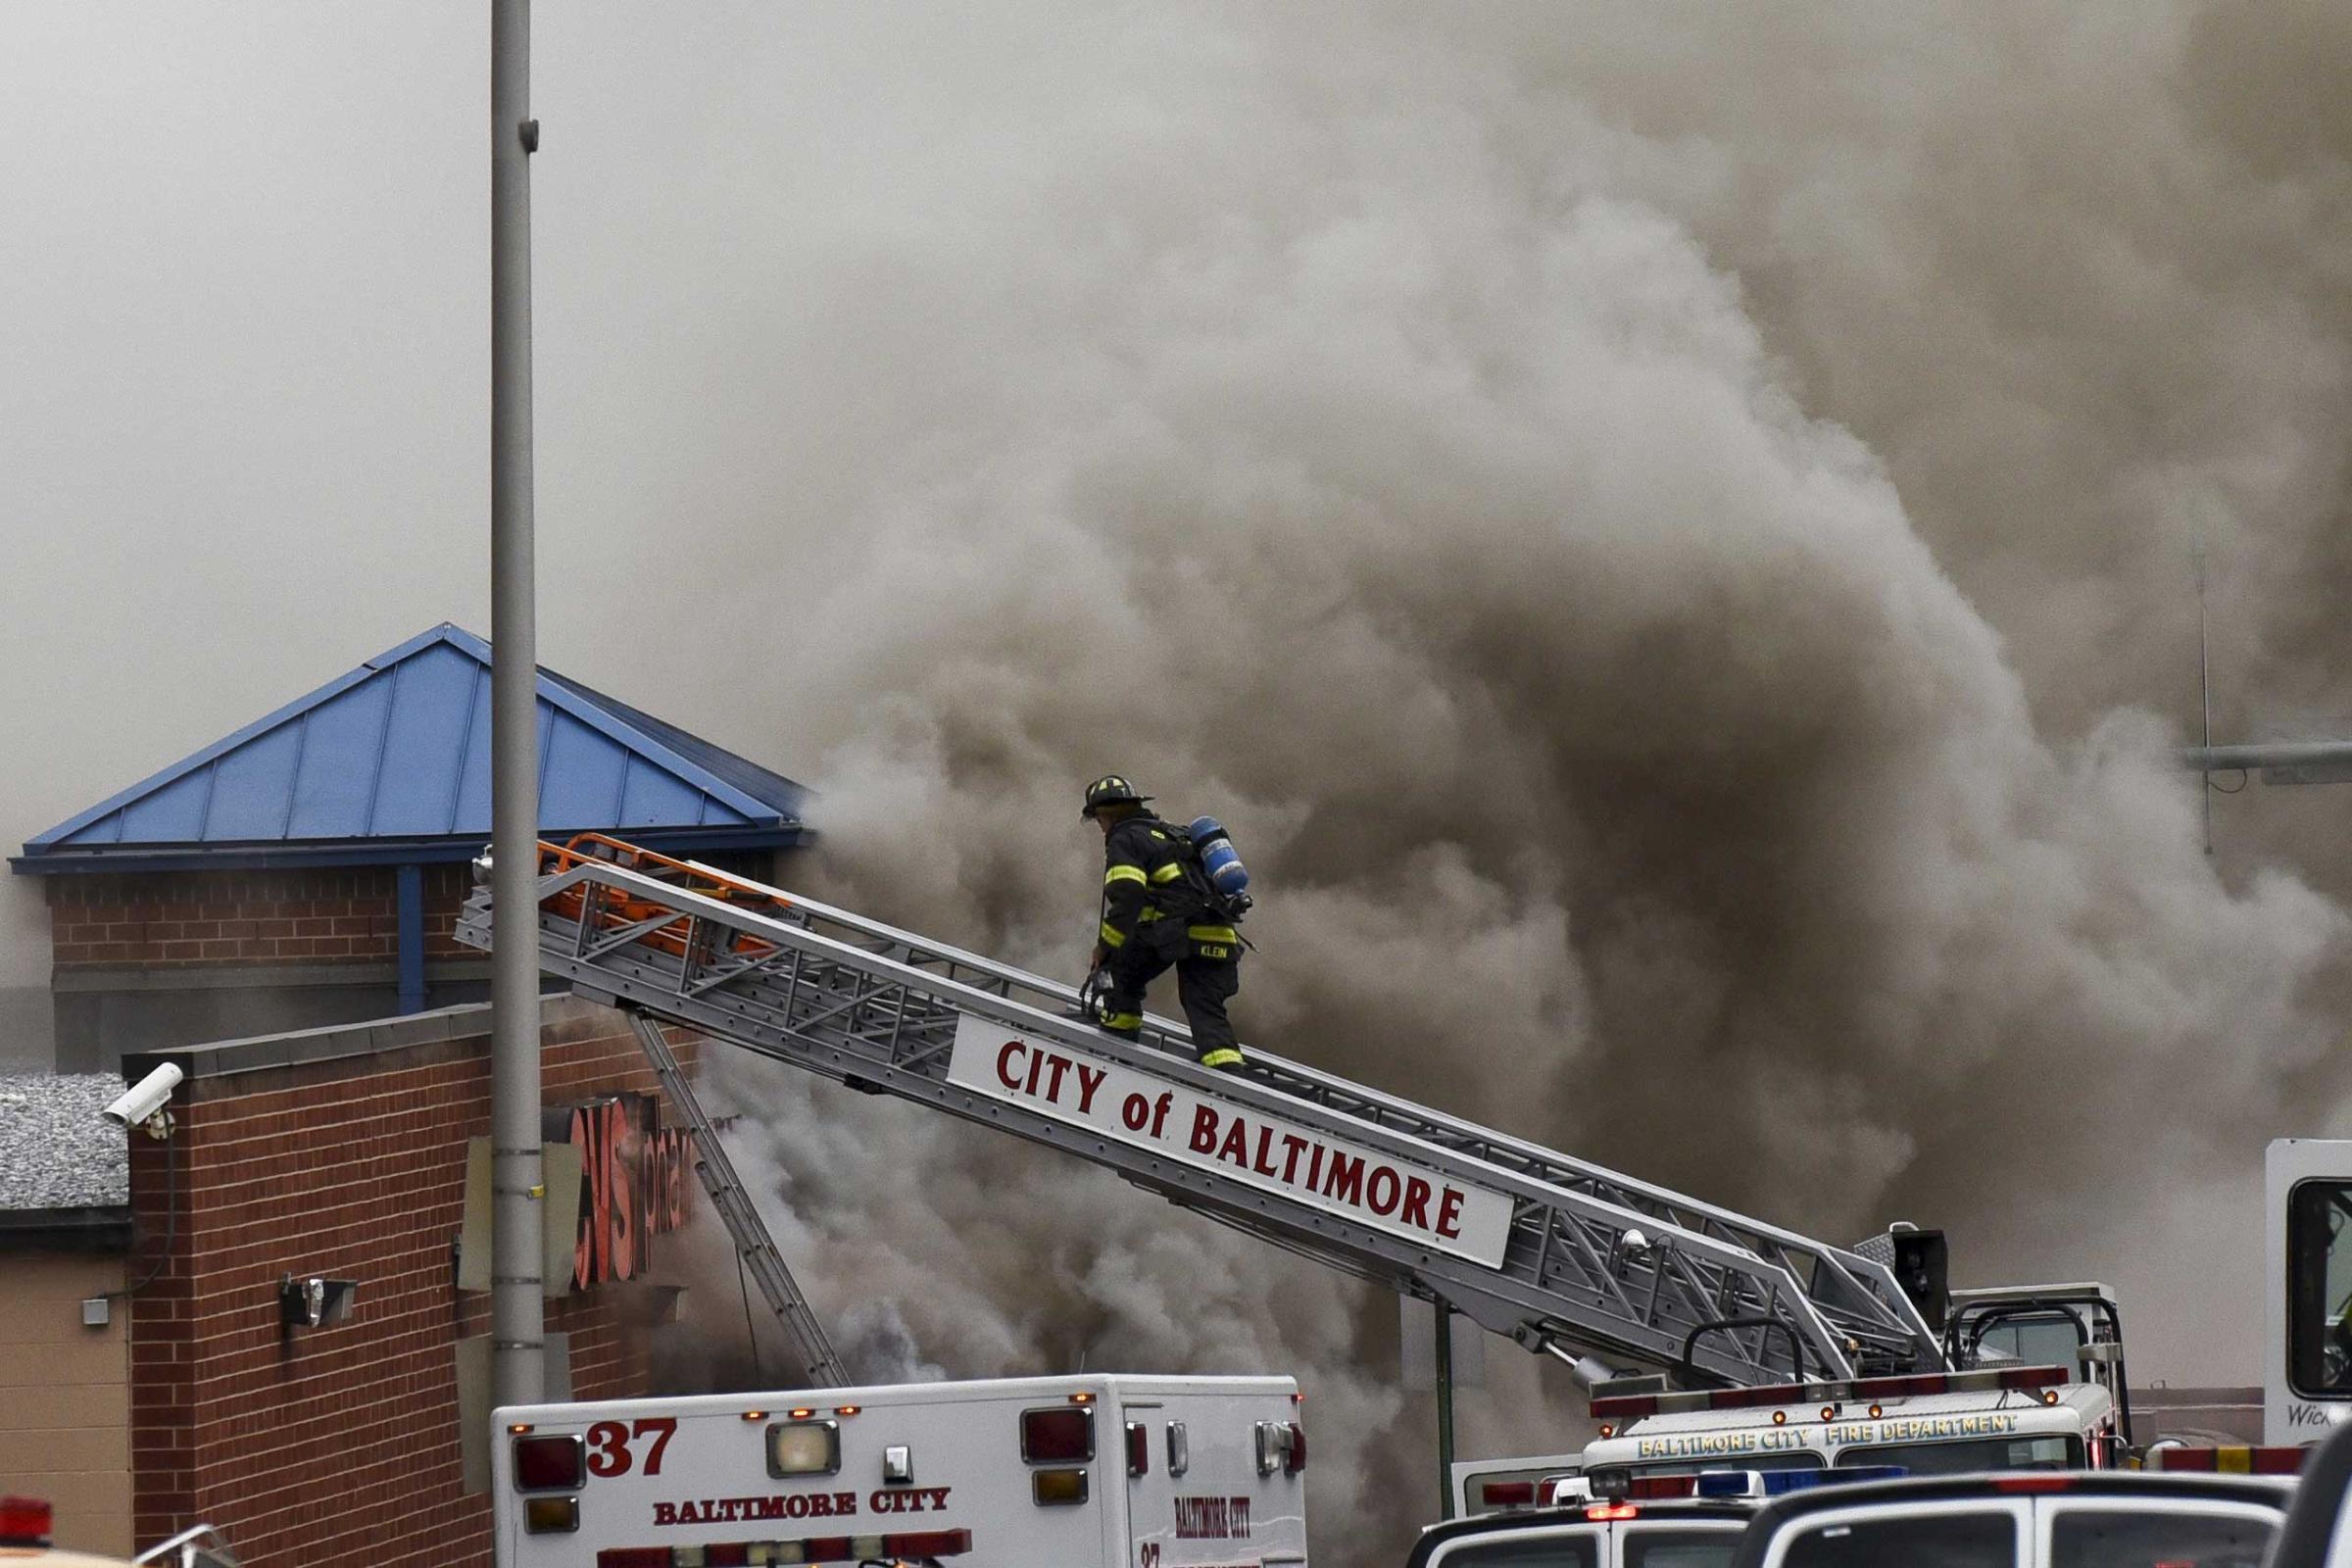 Fire figthers respond to a fire at a CVS pharmacy in Baltimore on April 27, 2015.